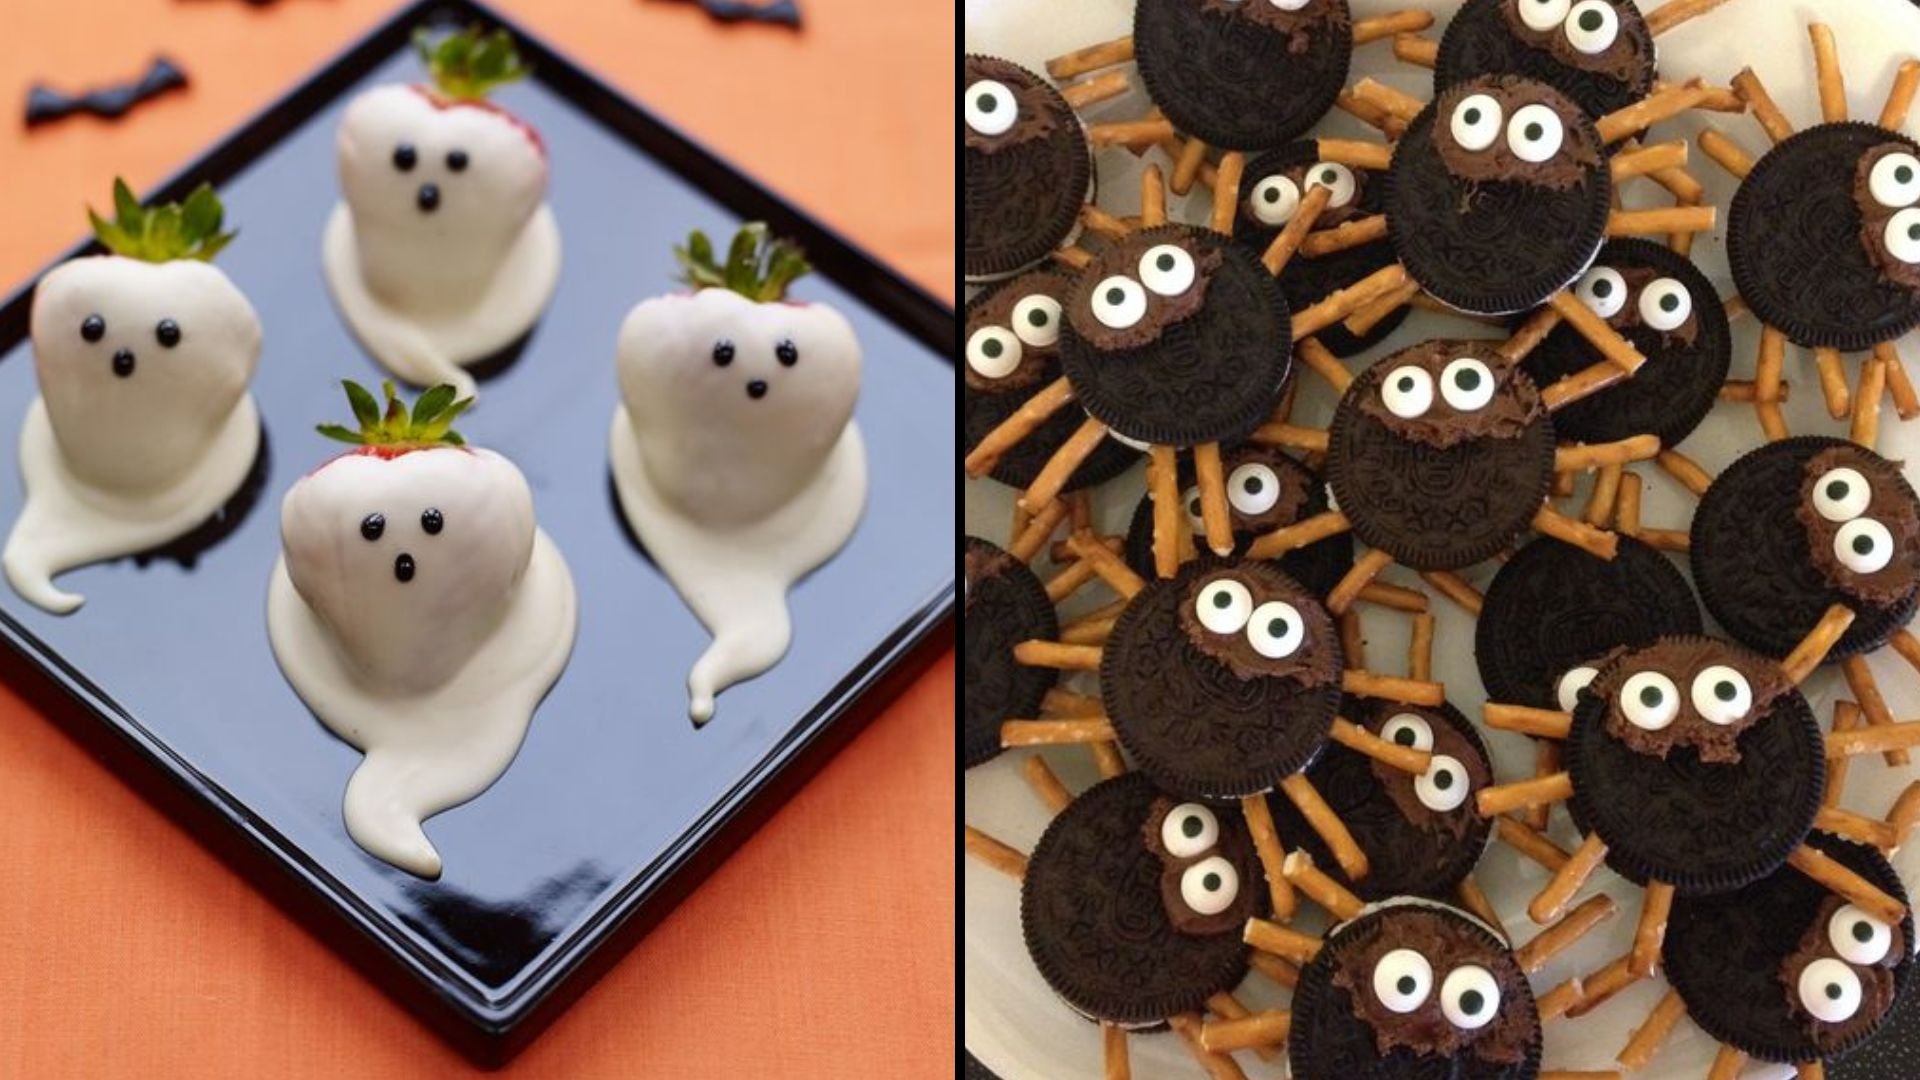 It doesn't get much easier that no-bake desserts for Halloween; try strawberry ghosts or oreo spiders.